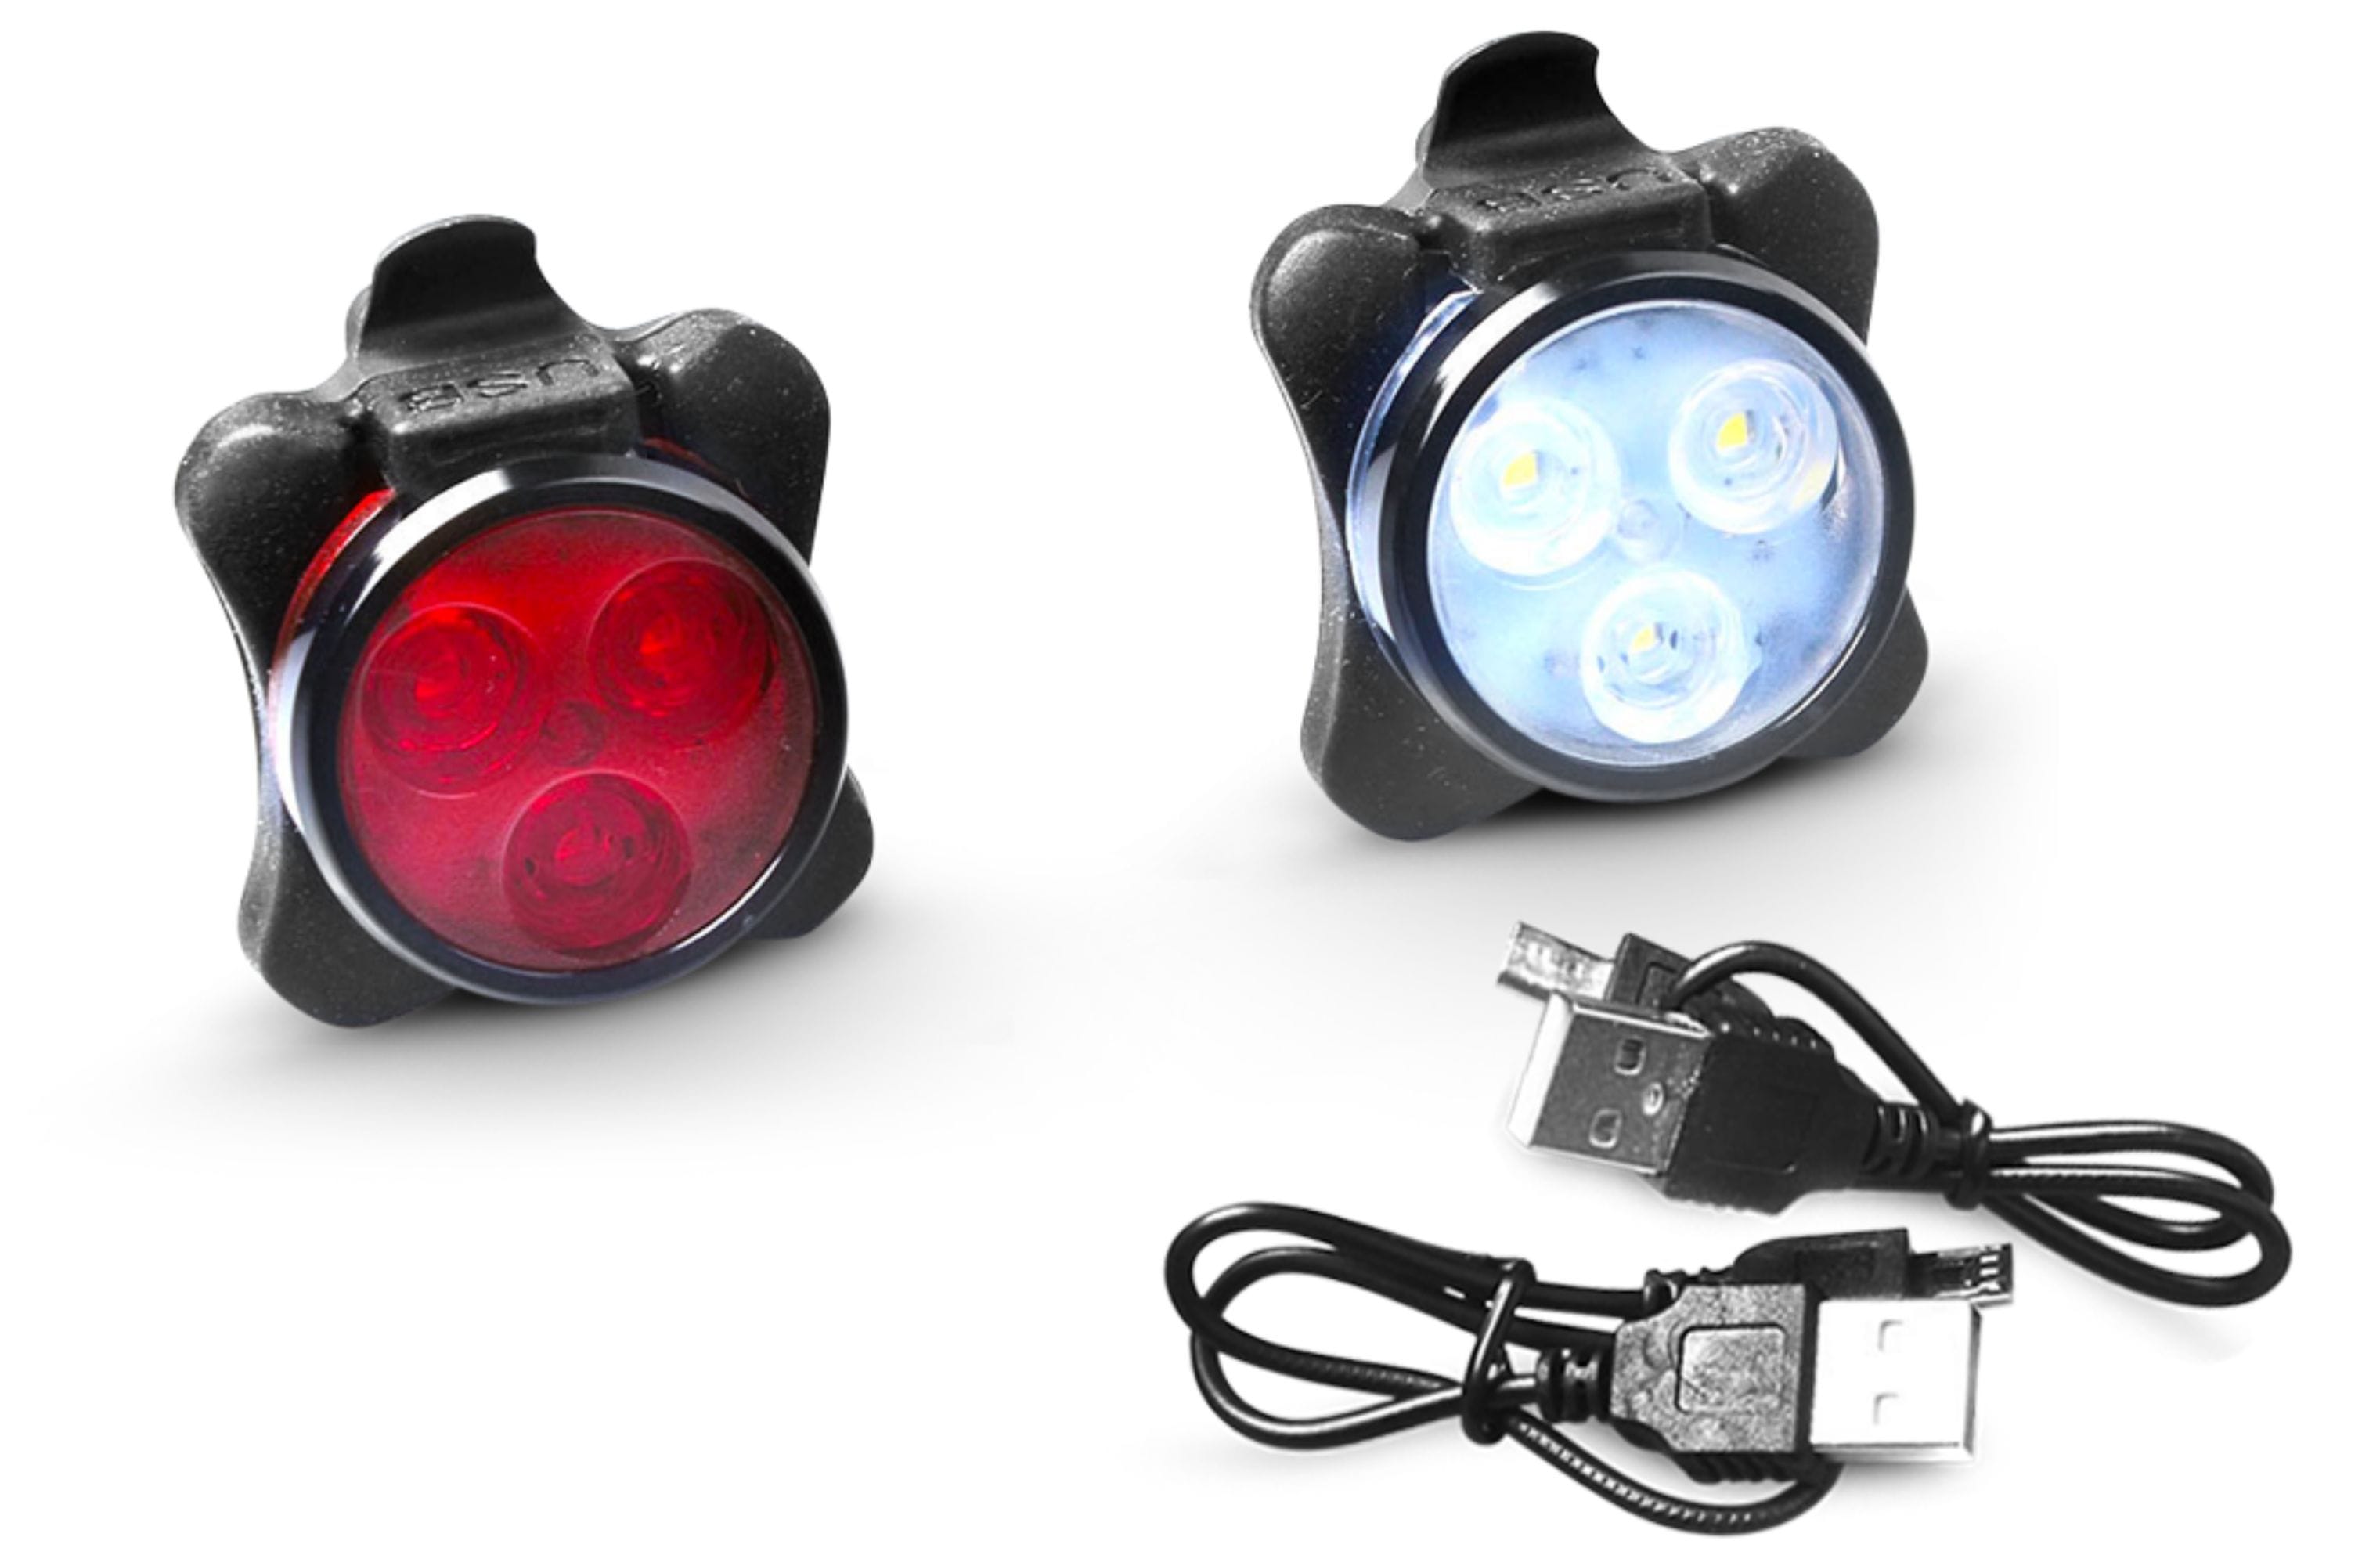 Uptown USB Rechargeable Bike Lights Brightest Bike Lights | USB Rechargeable Bike Lights Default LT-DOWN-USB